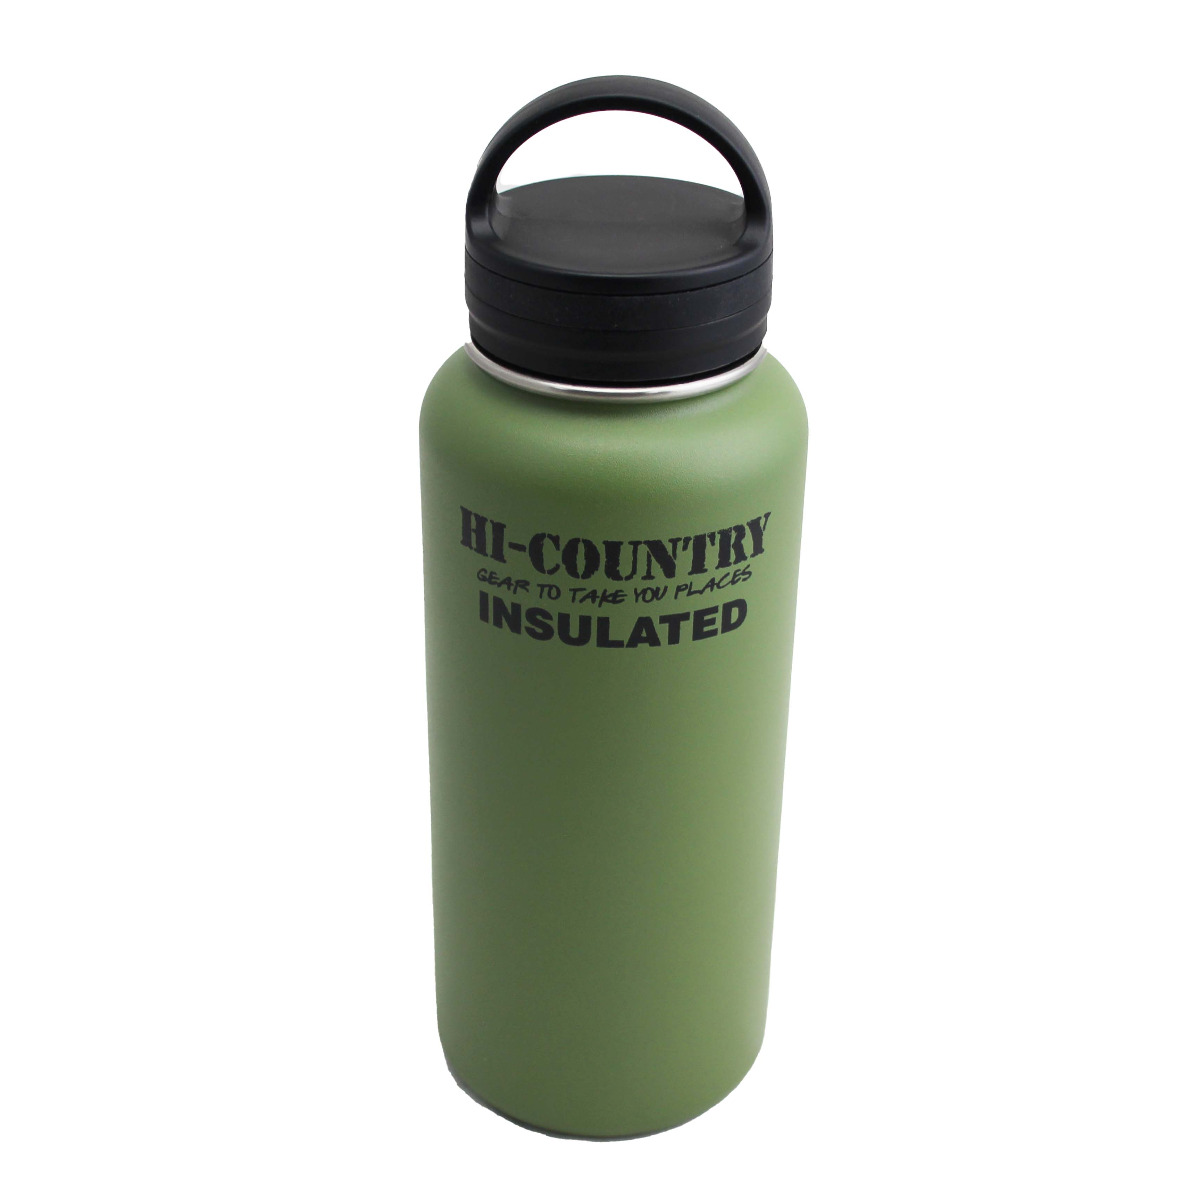 HI COUNTRY 1000ML DBL WALL STAINLESS STEEL CARRY Bottle